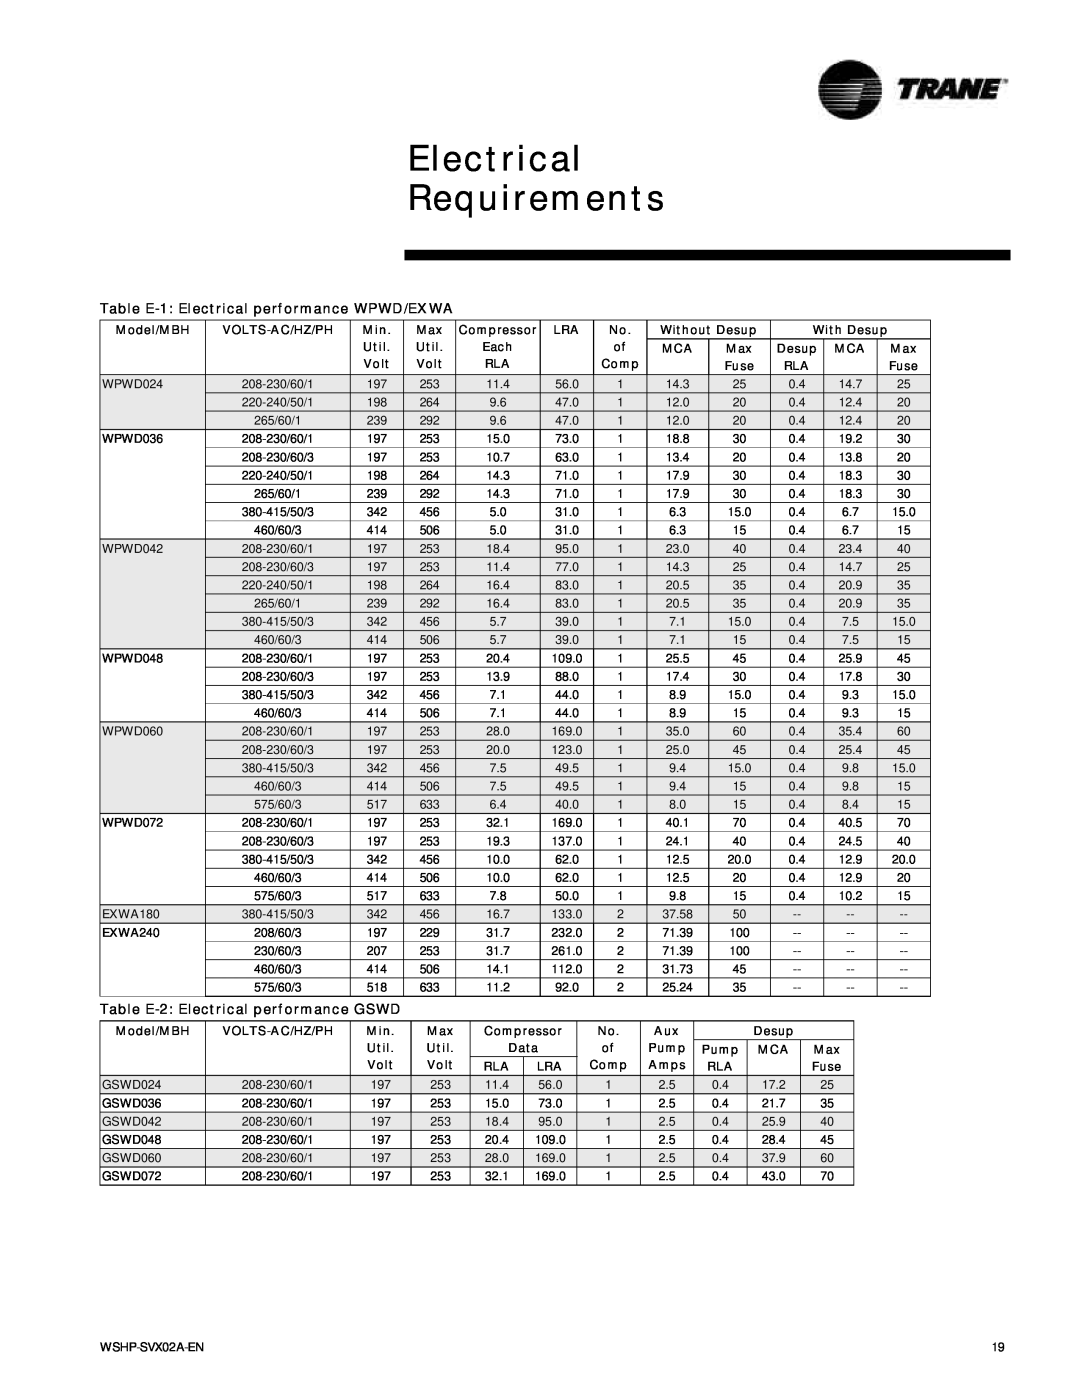 Trane manual Electrical Requirements, Table E-1 Electrical performance WPWD/EXWA, Table E-2 Electrical performance GSWD 